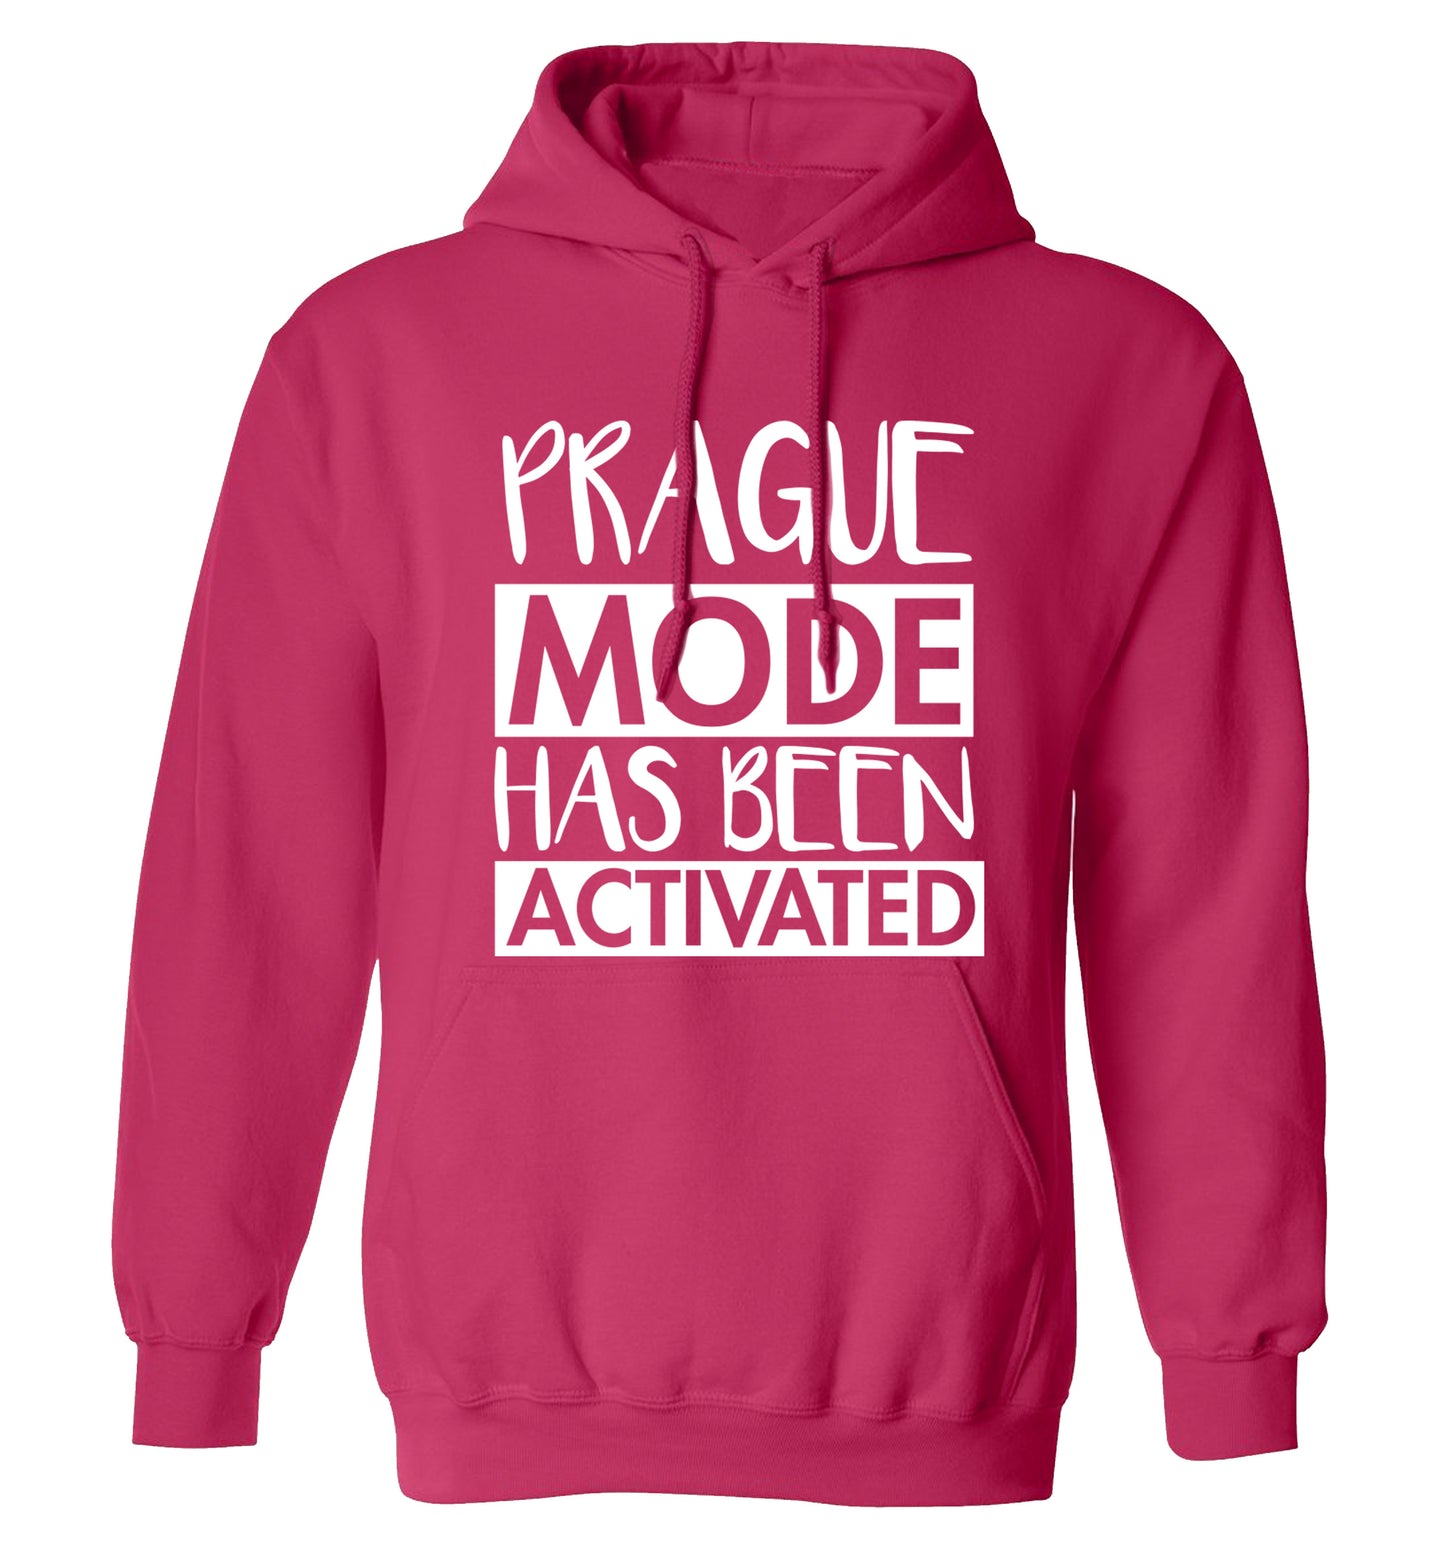 Prague mode has been activated adults unisex pink hoodie 2XL